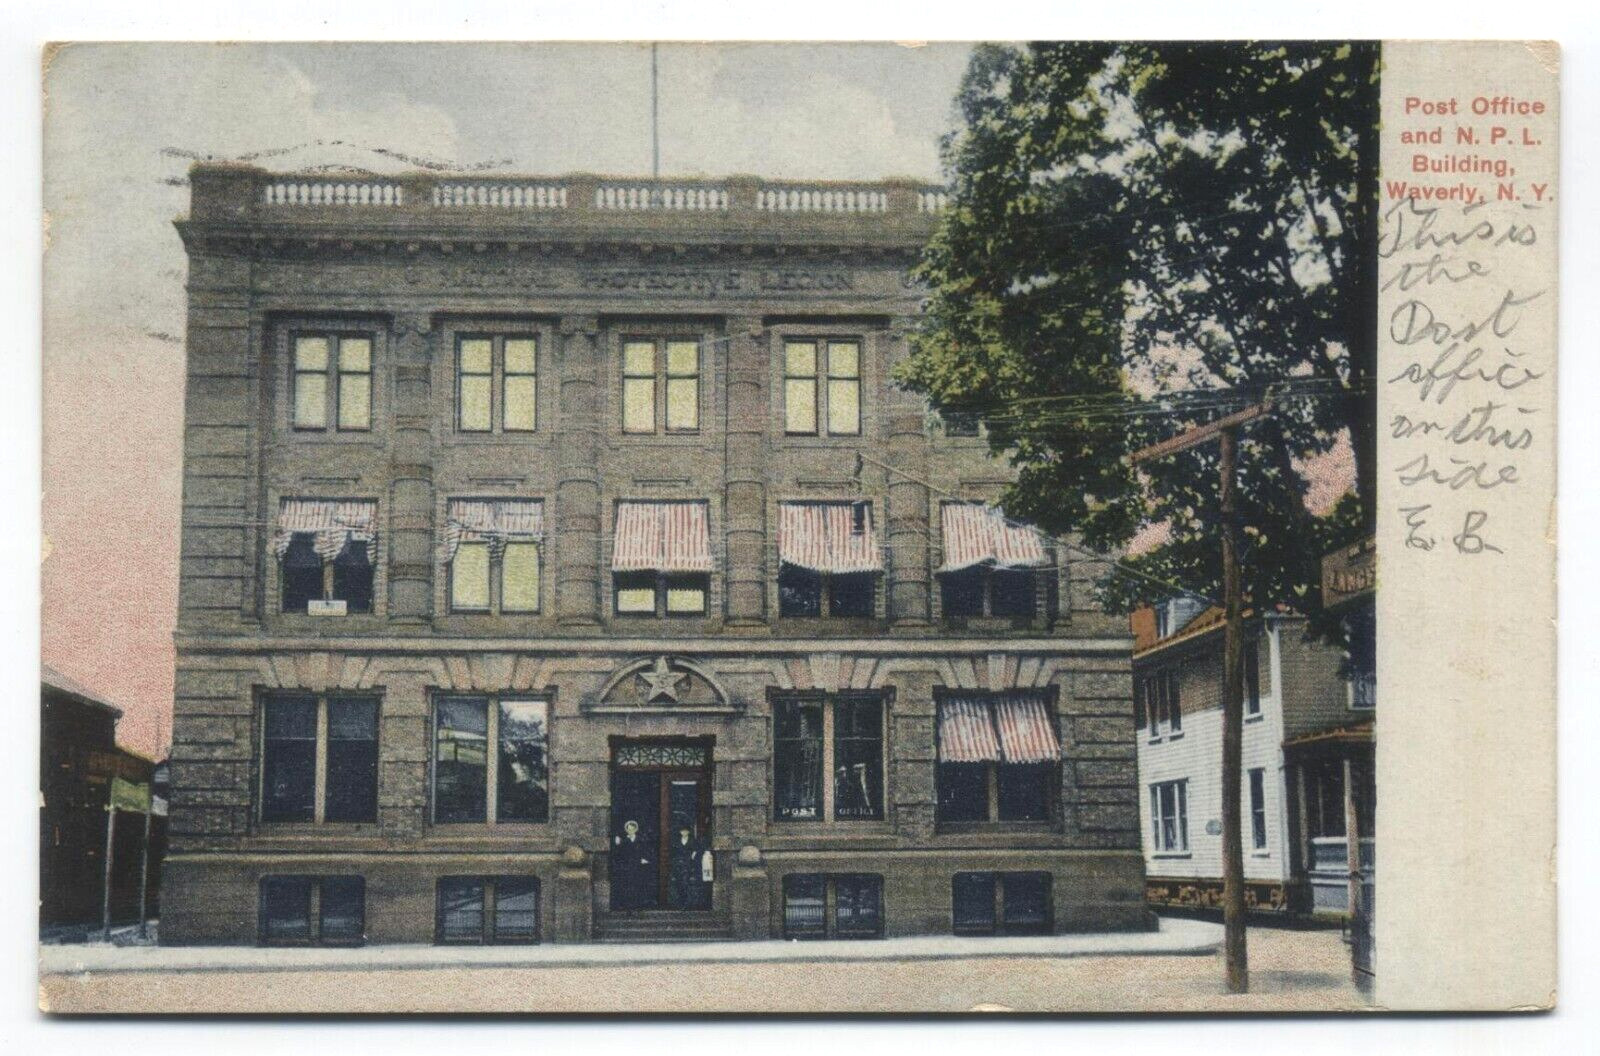 NY ~ Post Office & N.P.L. Building WAVERLY New York 1910 Tioga County Postcard